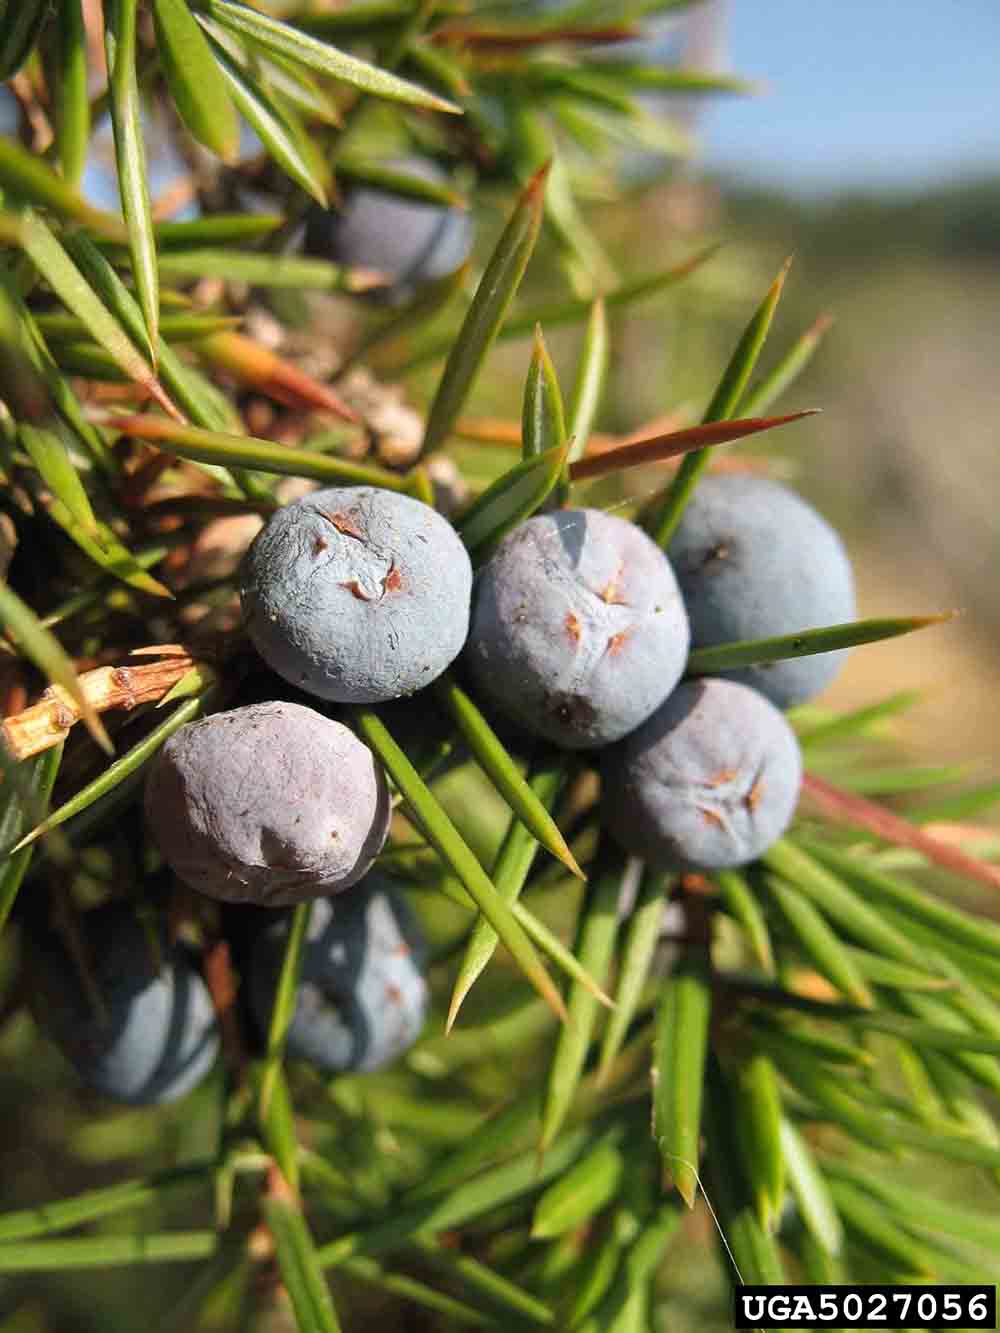 Common juniper fruit, resembling a berry but called a cone